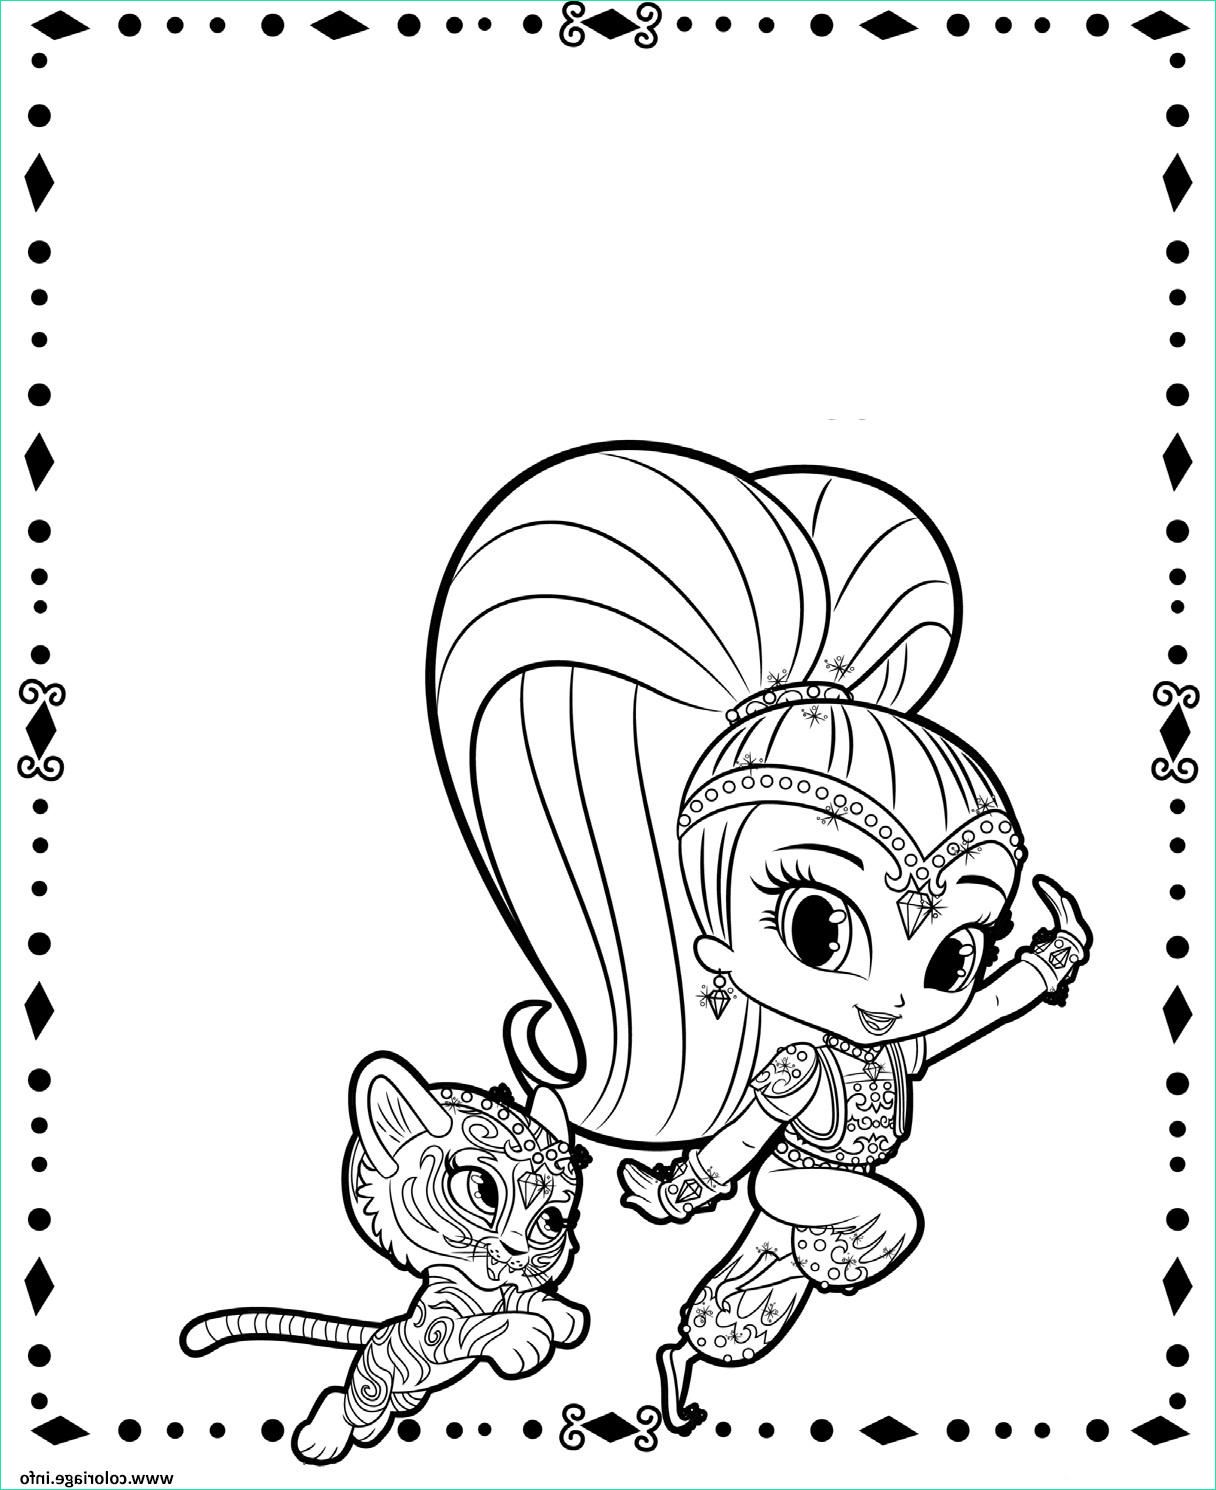 shine and tiger from shimmer et shine coloriage